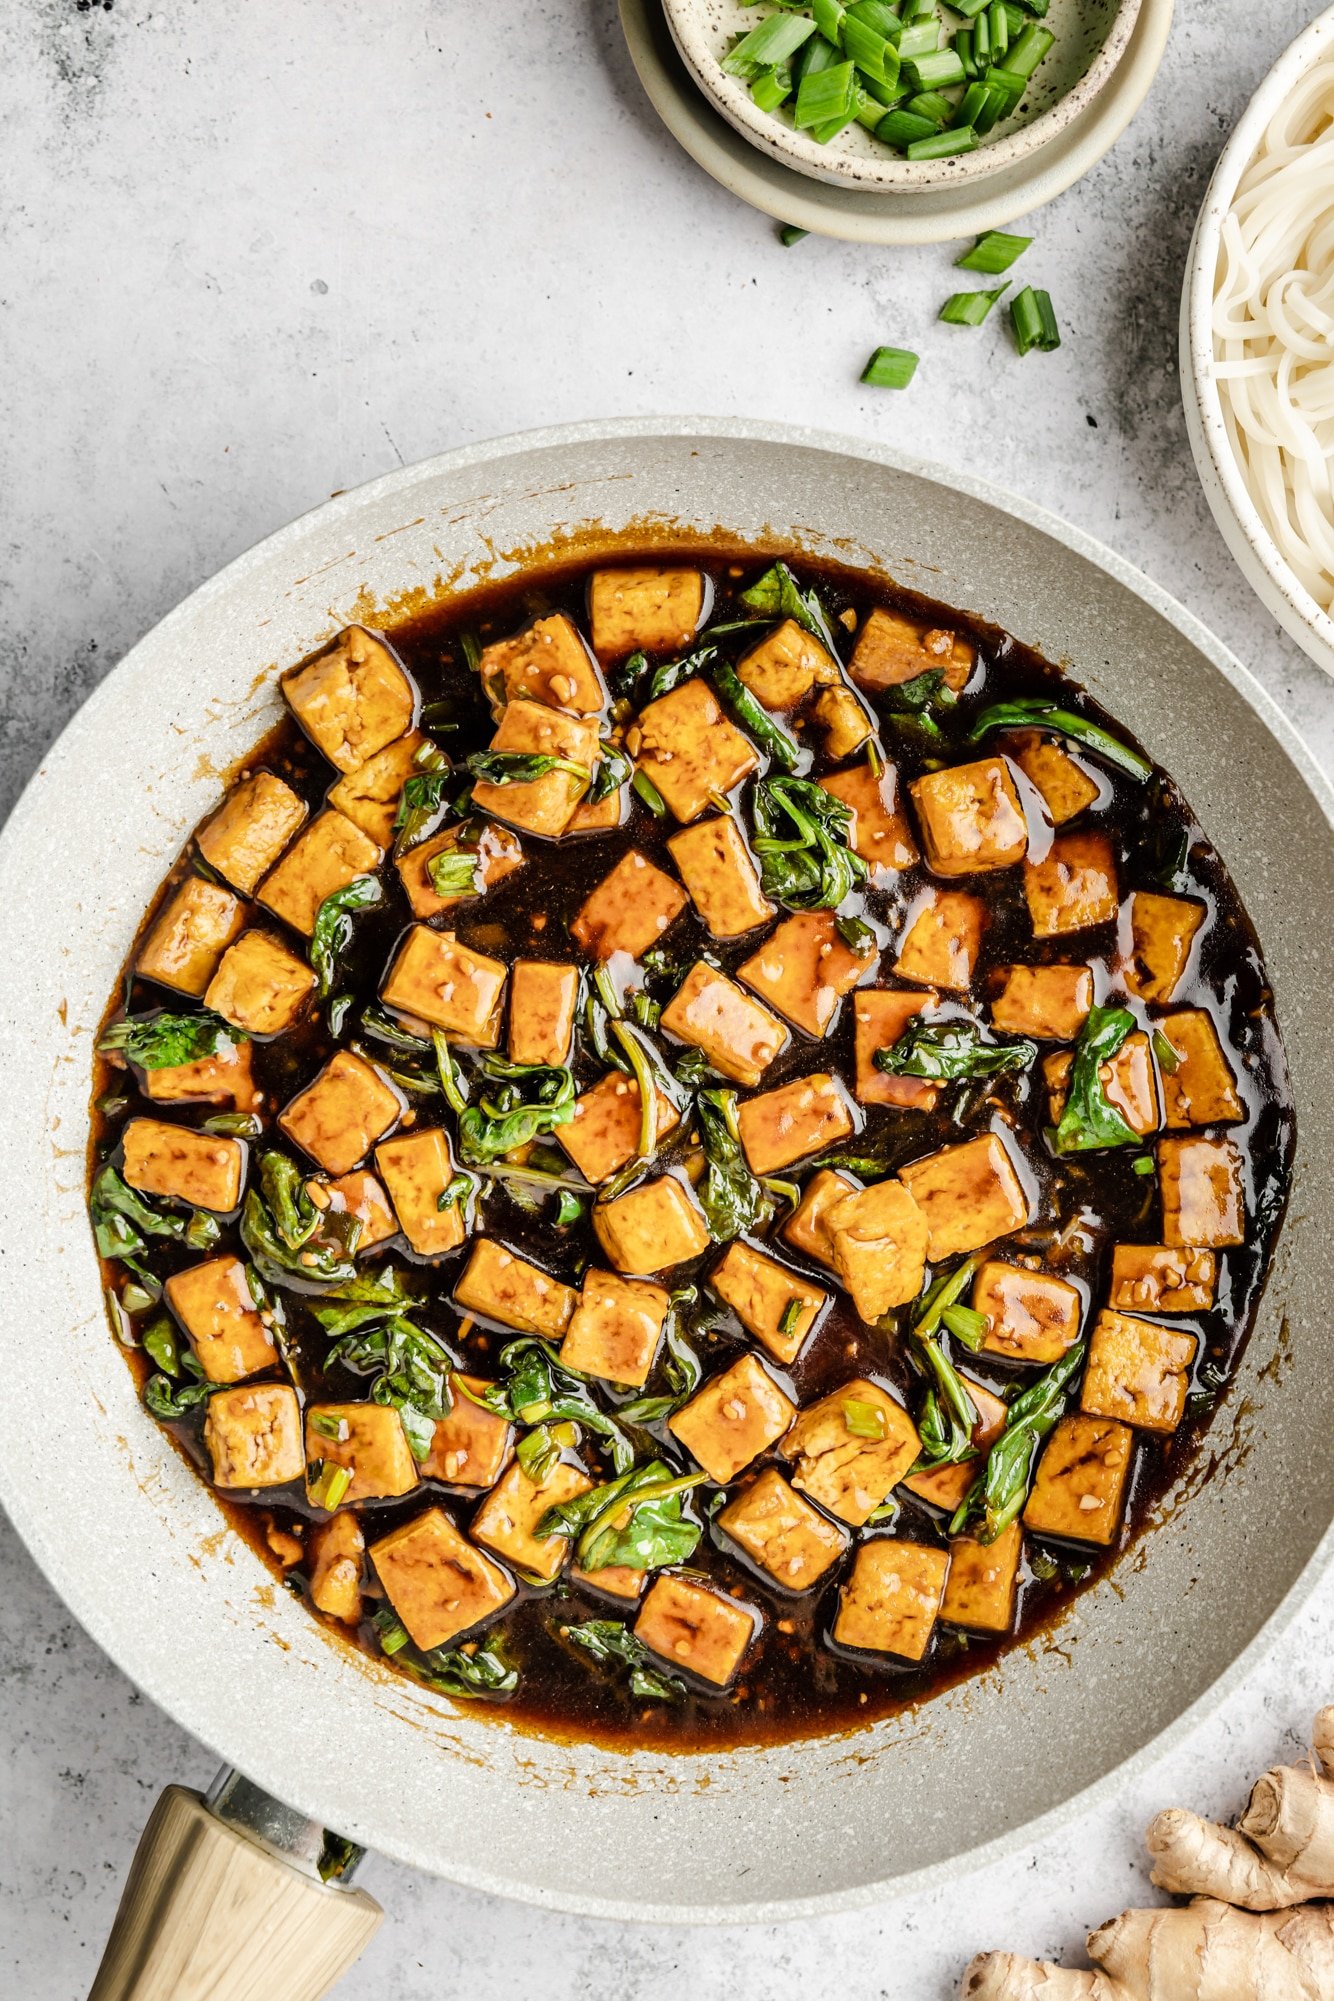 Skillet-cooked tofu and spinach with brown sauce.